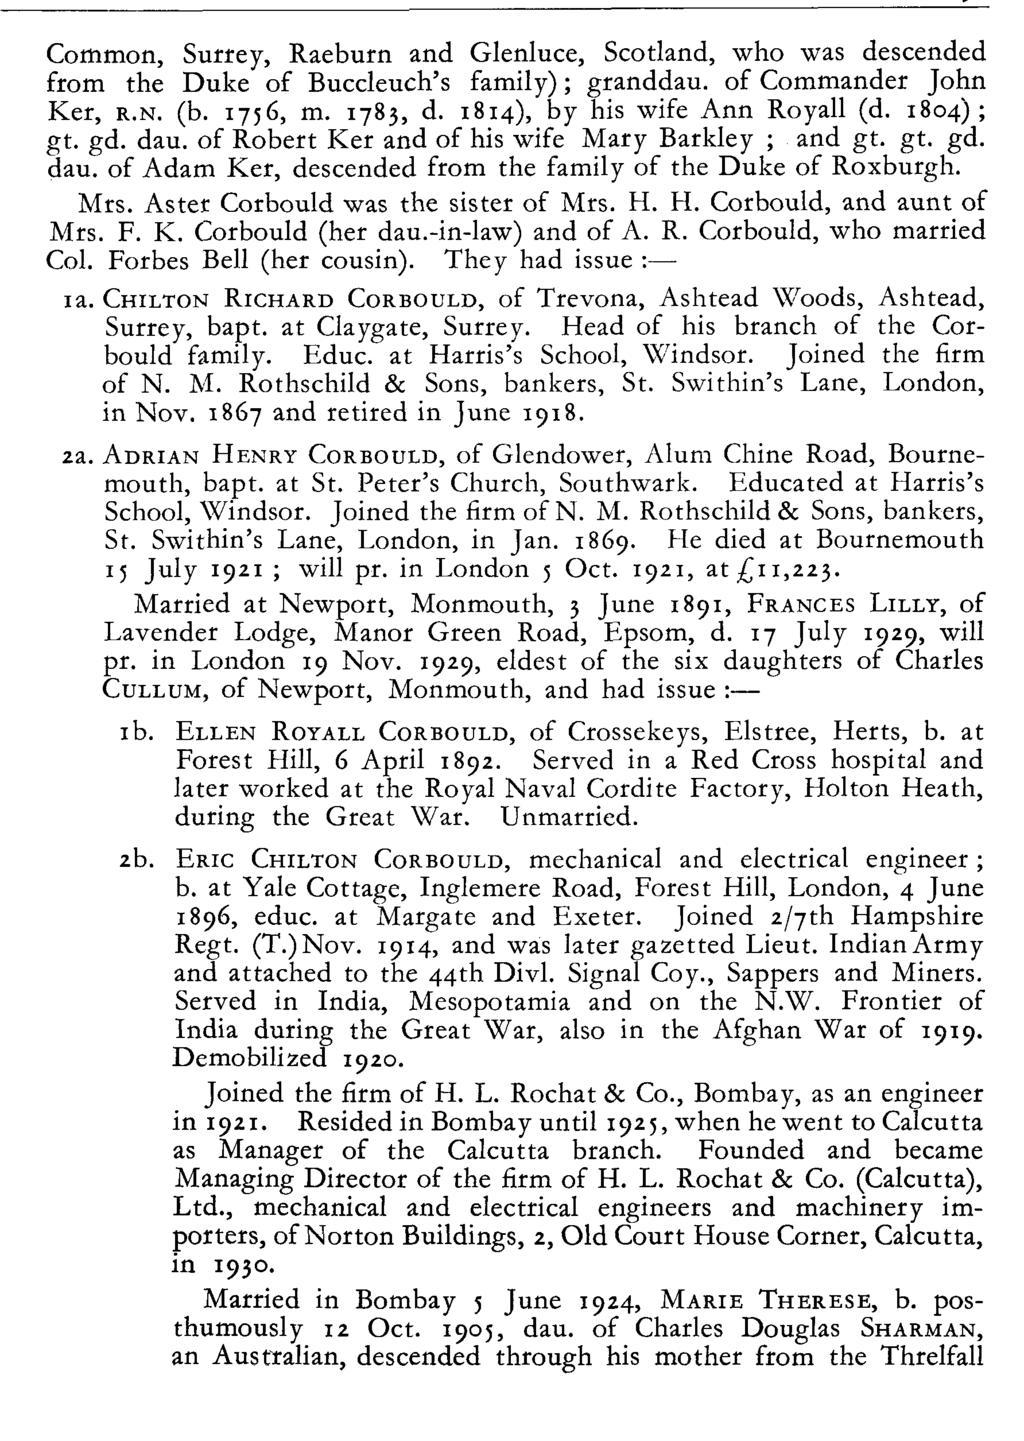 Common, Surrey, Raeburn and Glenluce, Scotland, who was descended from the Duke of Buccleuch's family) ; granddau. of Commander John Ker, R.N. (b. 1756, m. 1783, d. 1814), by his wife Ann Royal1 (d.